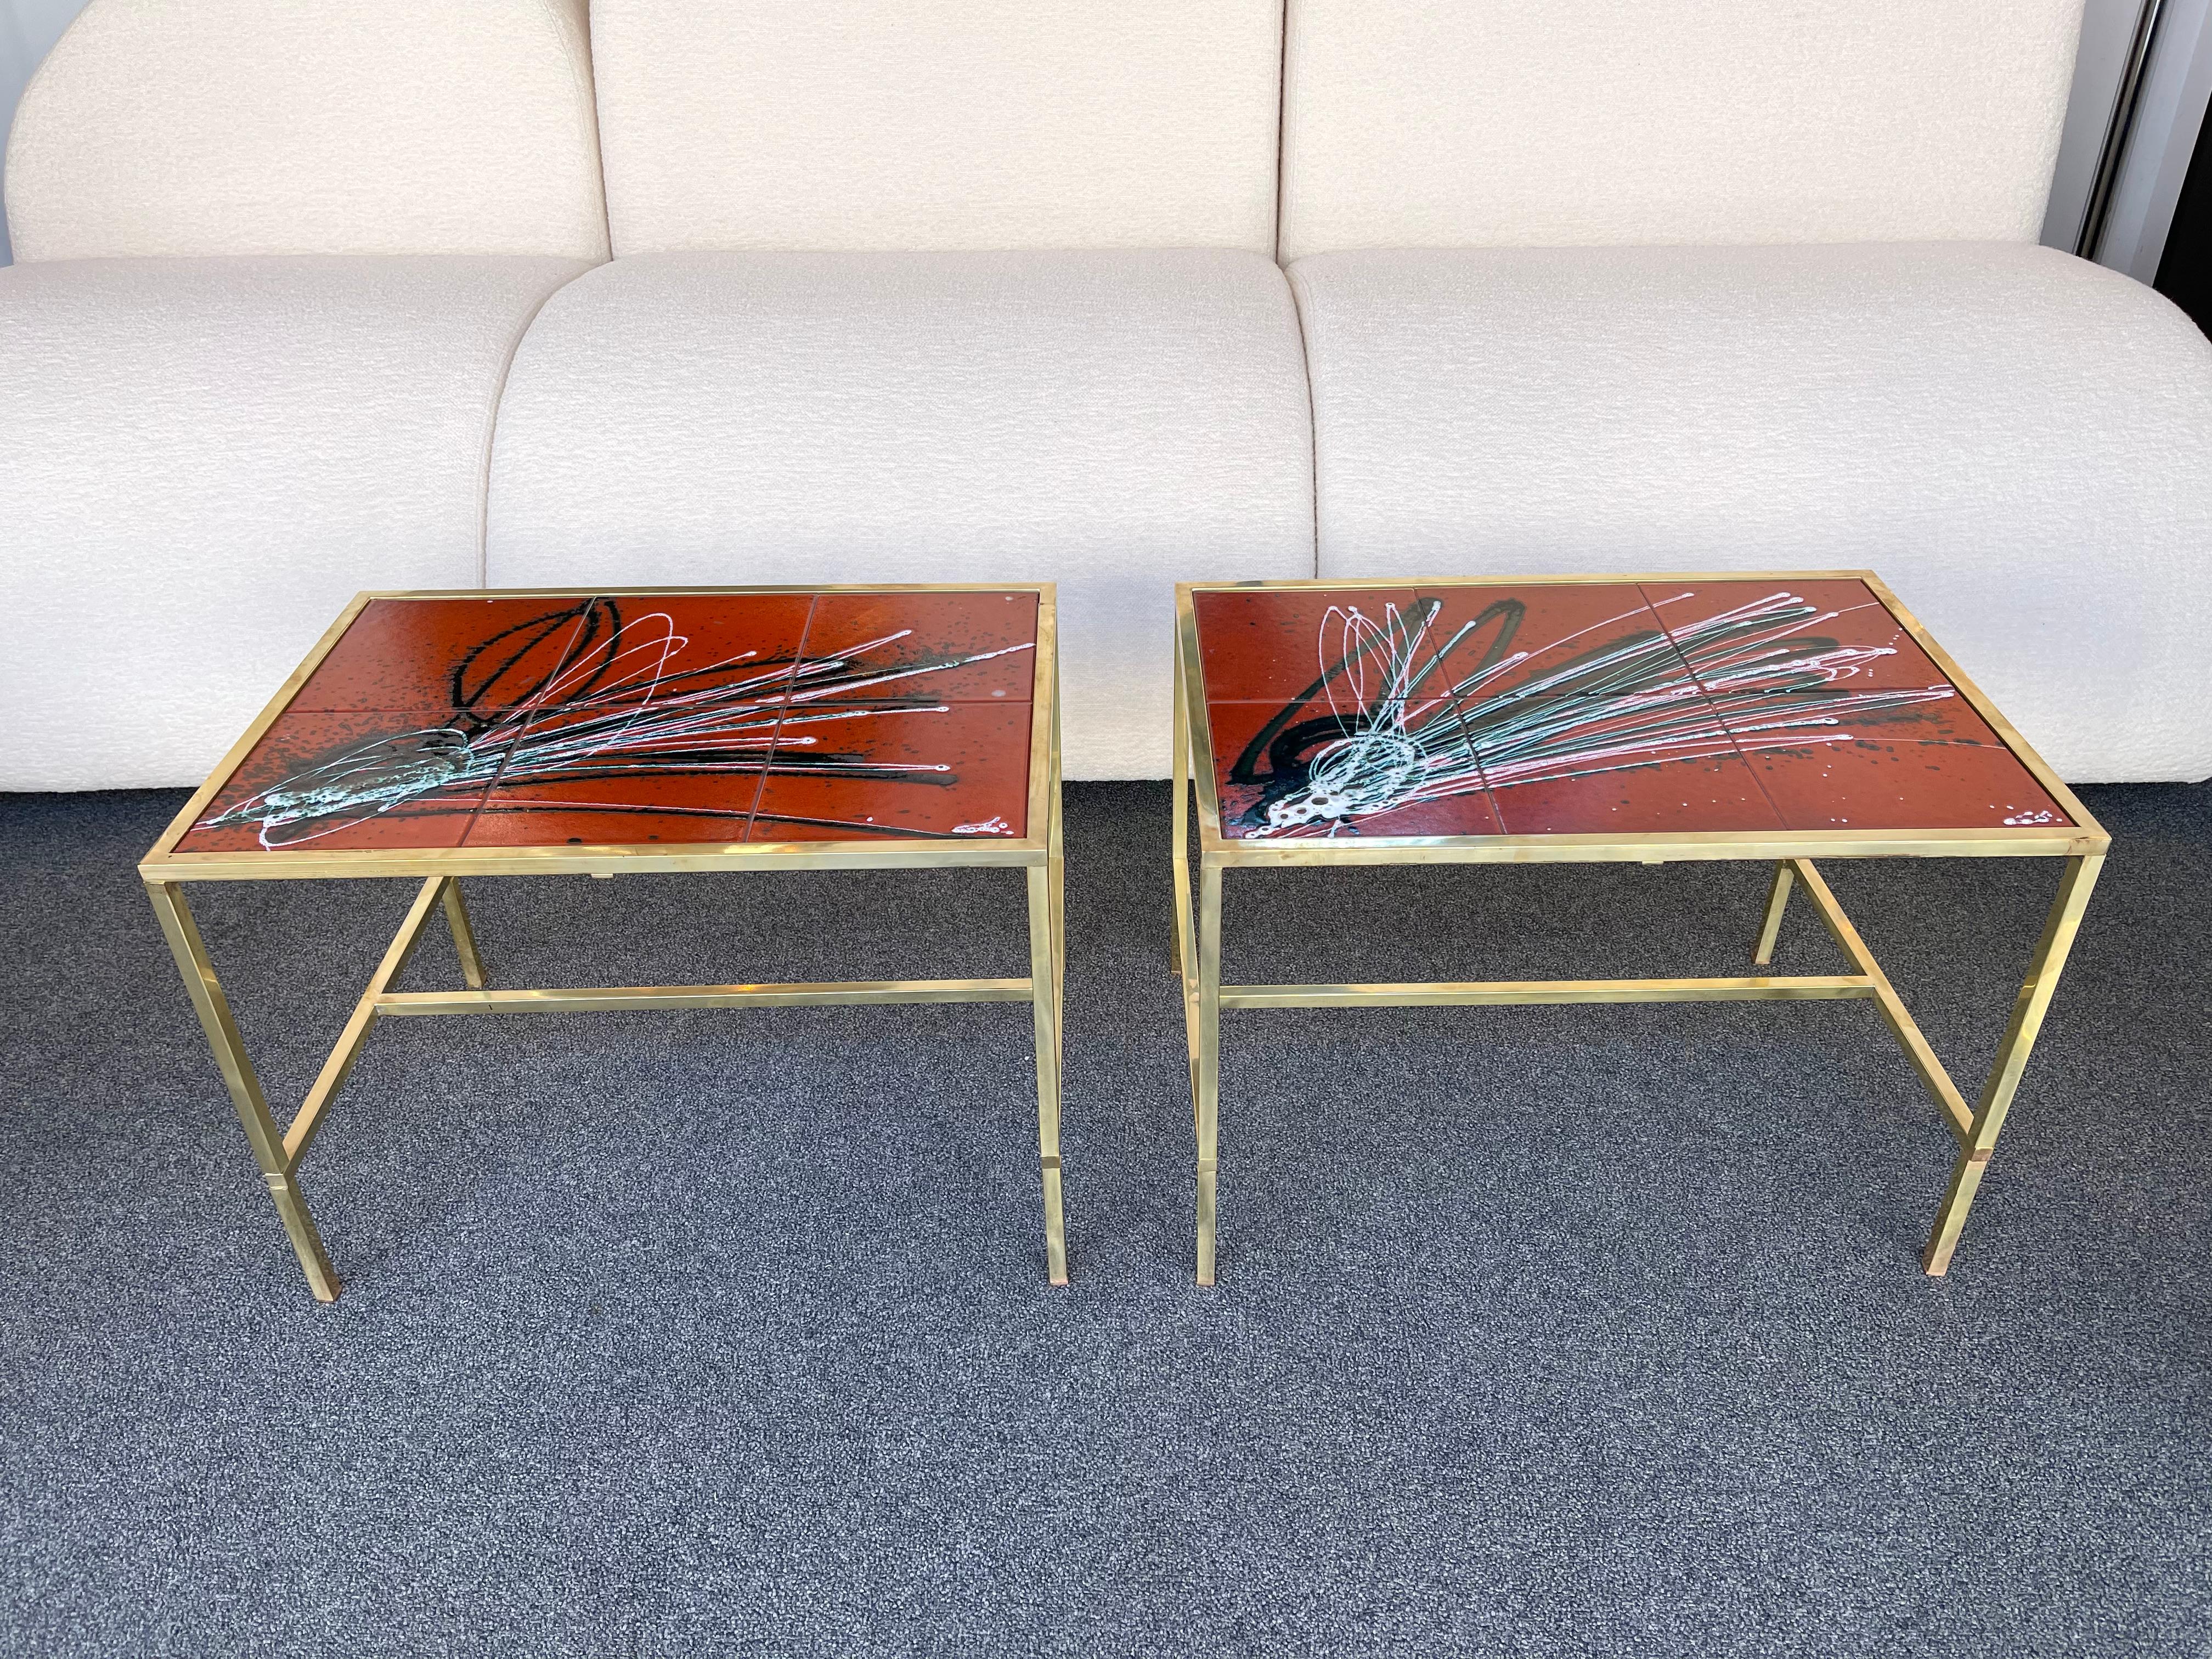 Pair of side end low coffee cocktail tables or nightstands in brass and ceramic terracotta with a nice abstract decor in the mood of Lucio Fontana for Borsani, Crippa, Scavino, Roger Capron, Vallauris.